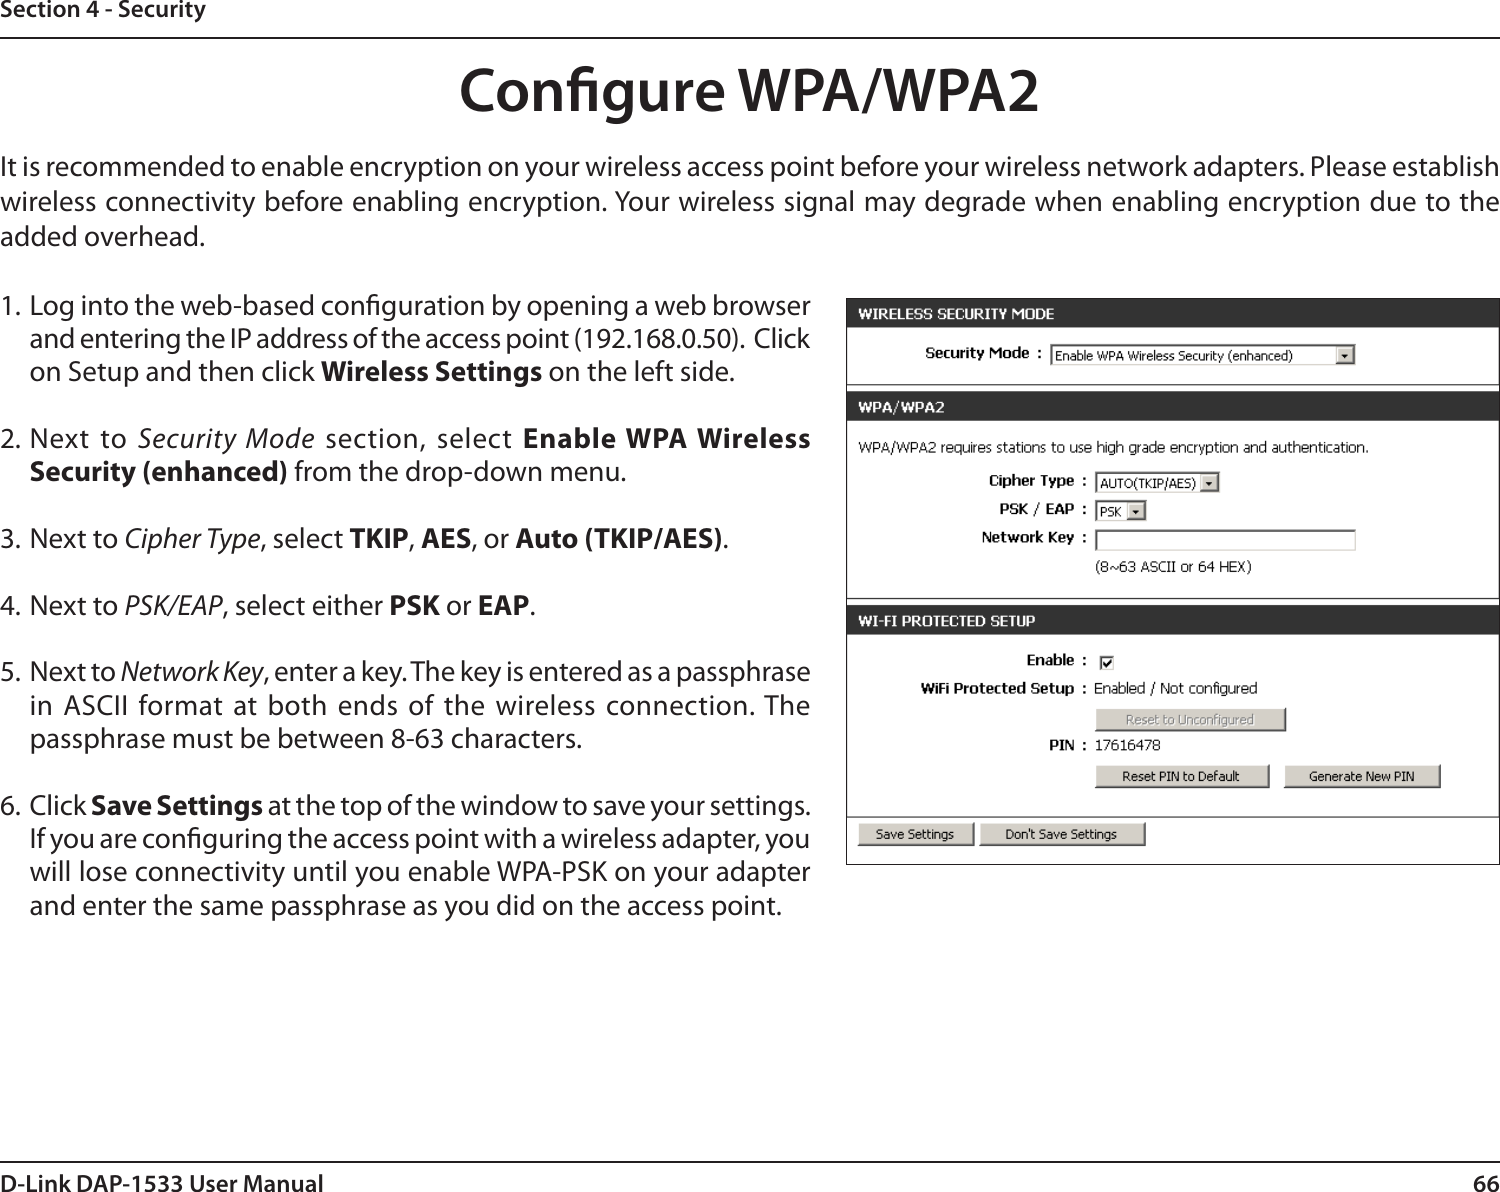 66D-Link DAP-1533 User ManualSection 4 - SecurityCongure WPA/WPA2It is recommended to enable encryption on your wireless access point before your wireless network adapters. Please establish wireless connectivity before enabling encryption. Your wireless signal may degrade when enabling encryption due to the added overhead.1. Log into the web-based conguration by opening a web browser and entering the IP address of the access point (192.168.0.50).  Click on Setup and then click Wireless Settings on the left side.2. Next  to  Security Mode  section, select Enable WPA Wireless Security (enhanced) from the drop-down menu.3. Next to Cipher Type, select TKIP, AES, or Auto (TKIP/AES).4. Next to PSK/EAP, select either PSK or EAP.5. Next to Network Key, enter a key. The key is entered as a passphrase in  ASCII  format  at  both  ends  of  the  wireless  connection. The passphrase must be between 8-63 characters. 6. Click Save Settings at the top of the window to save your settings. If you are conguring the access point with a wireless adapter, you will lose connectivity until you enable WPA-PSK on your adapter and enter the same passphrase as you did on the access point.